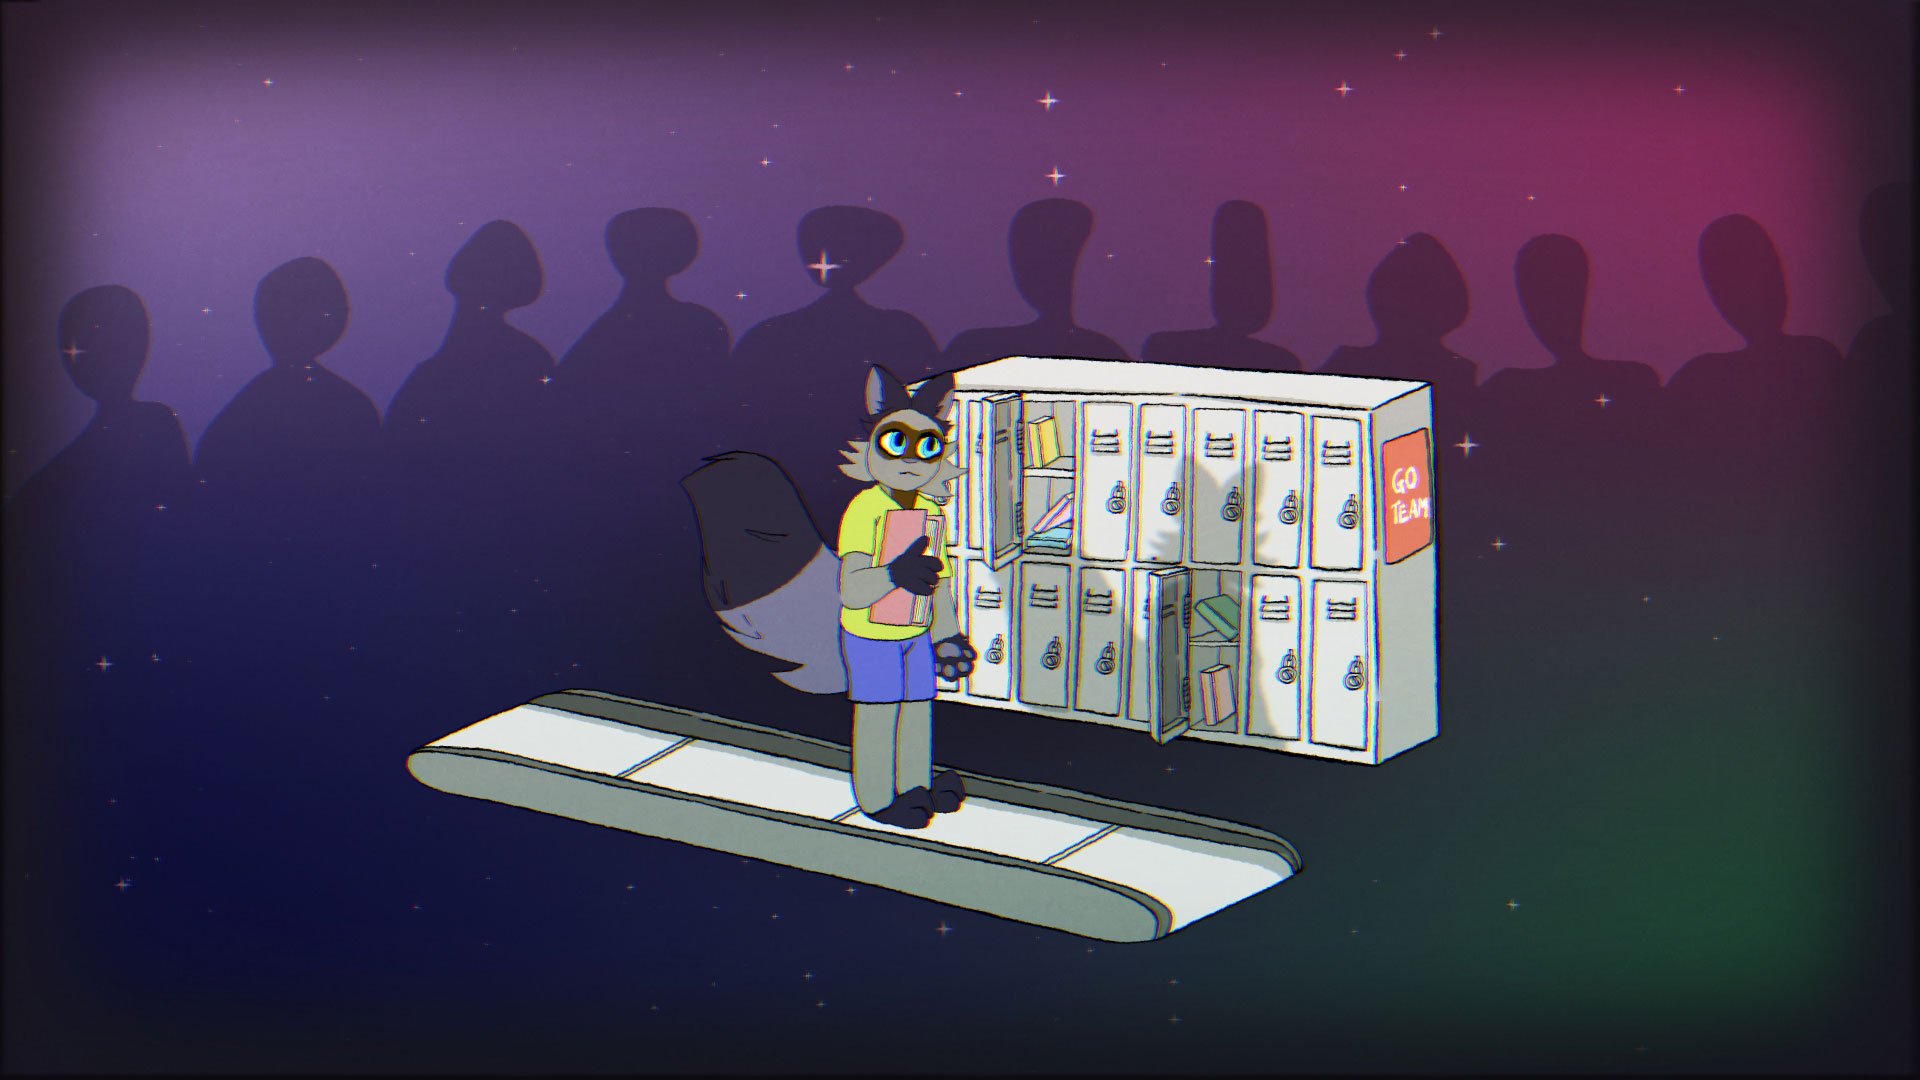 The Fallens animated character Mimosa on a cartoon conveyor belt passing lockers at school. He looks scared and there are ominous shadows in the background (Copy)